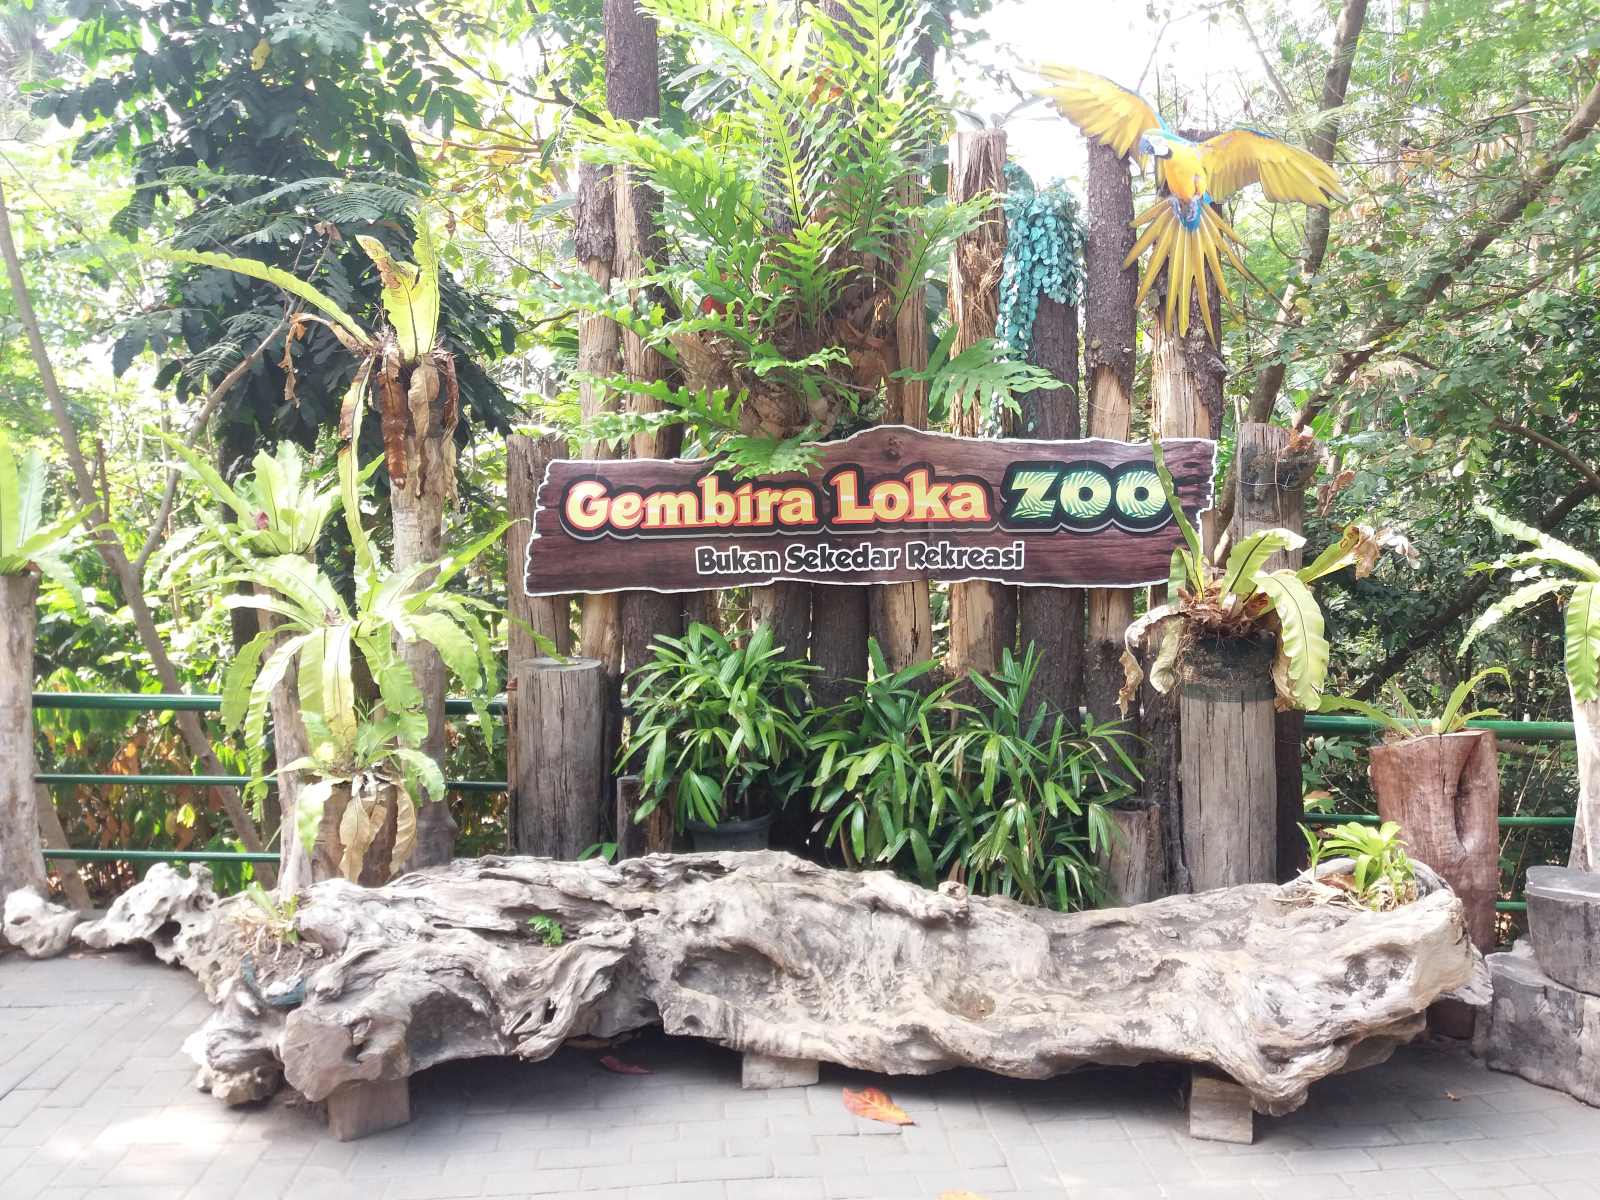 16-intriguing-facts-about-gembira-loka-zoo